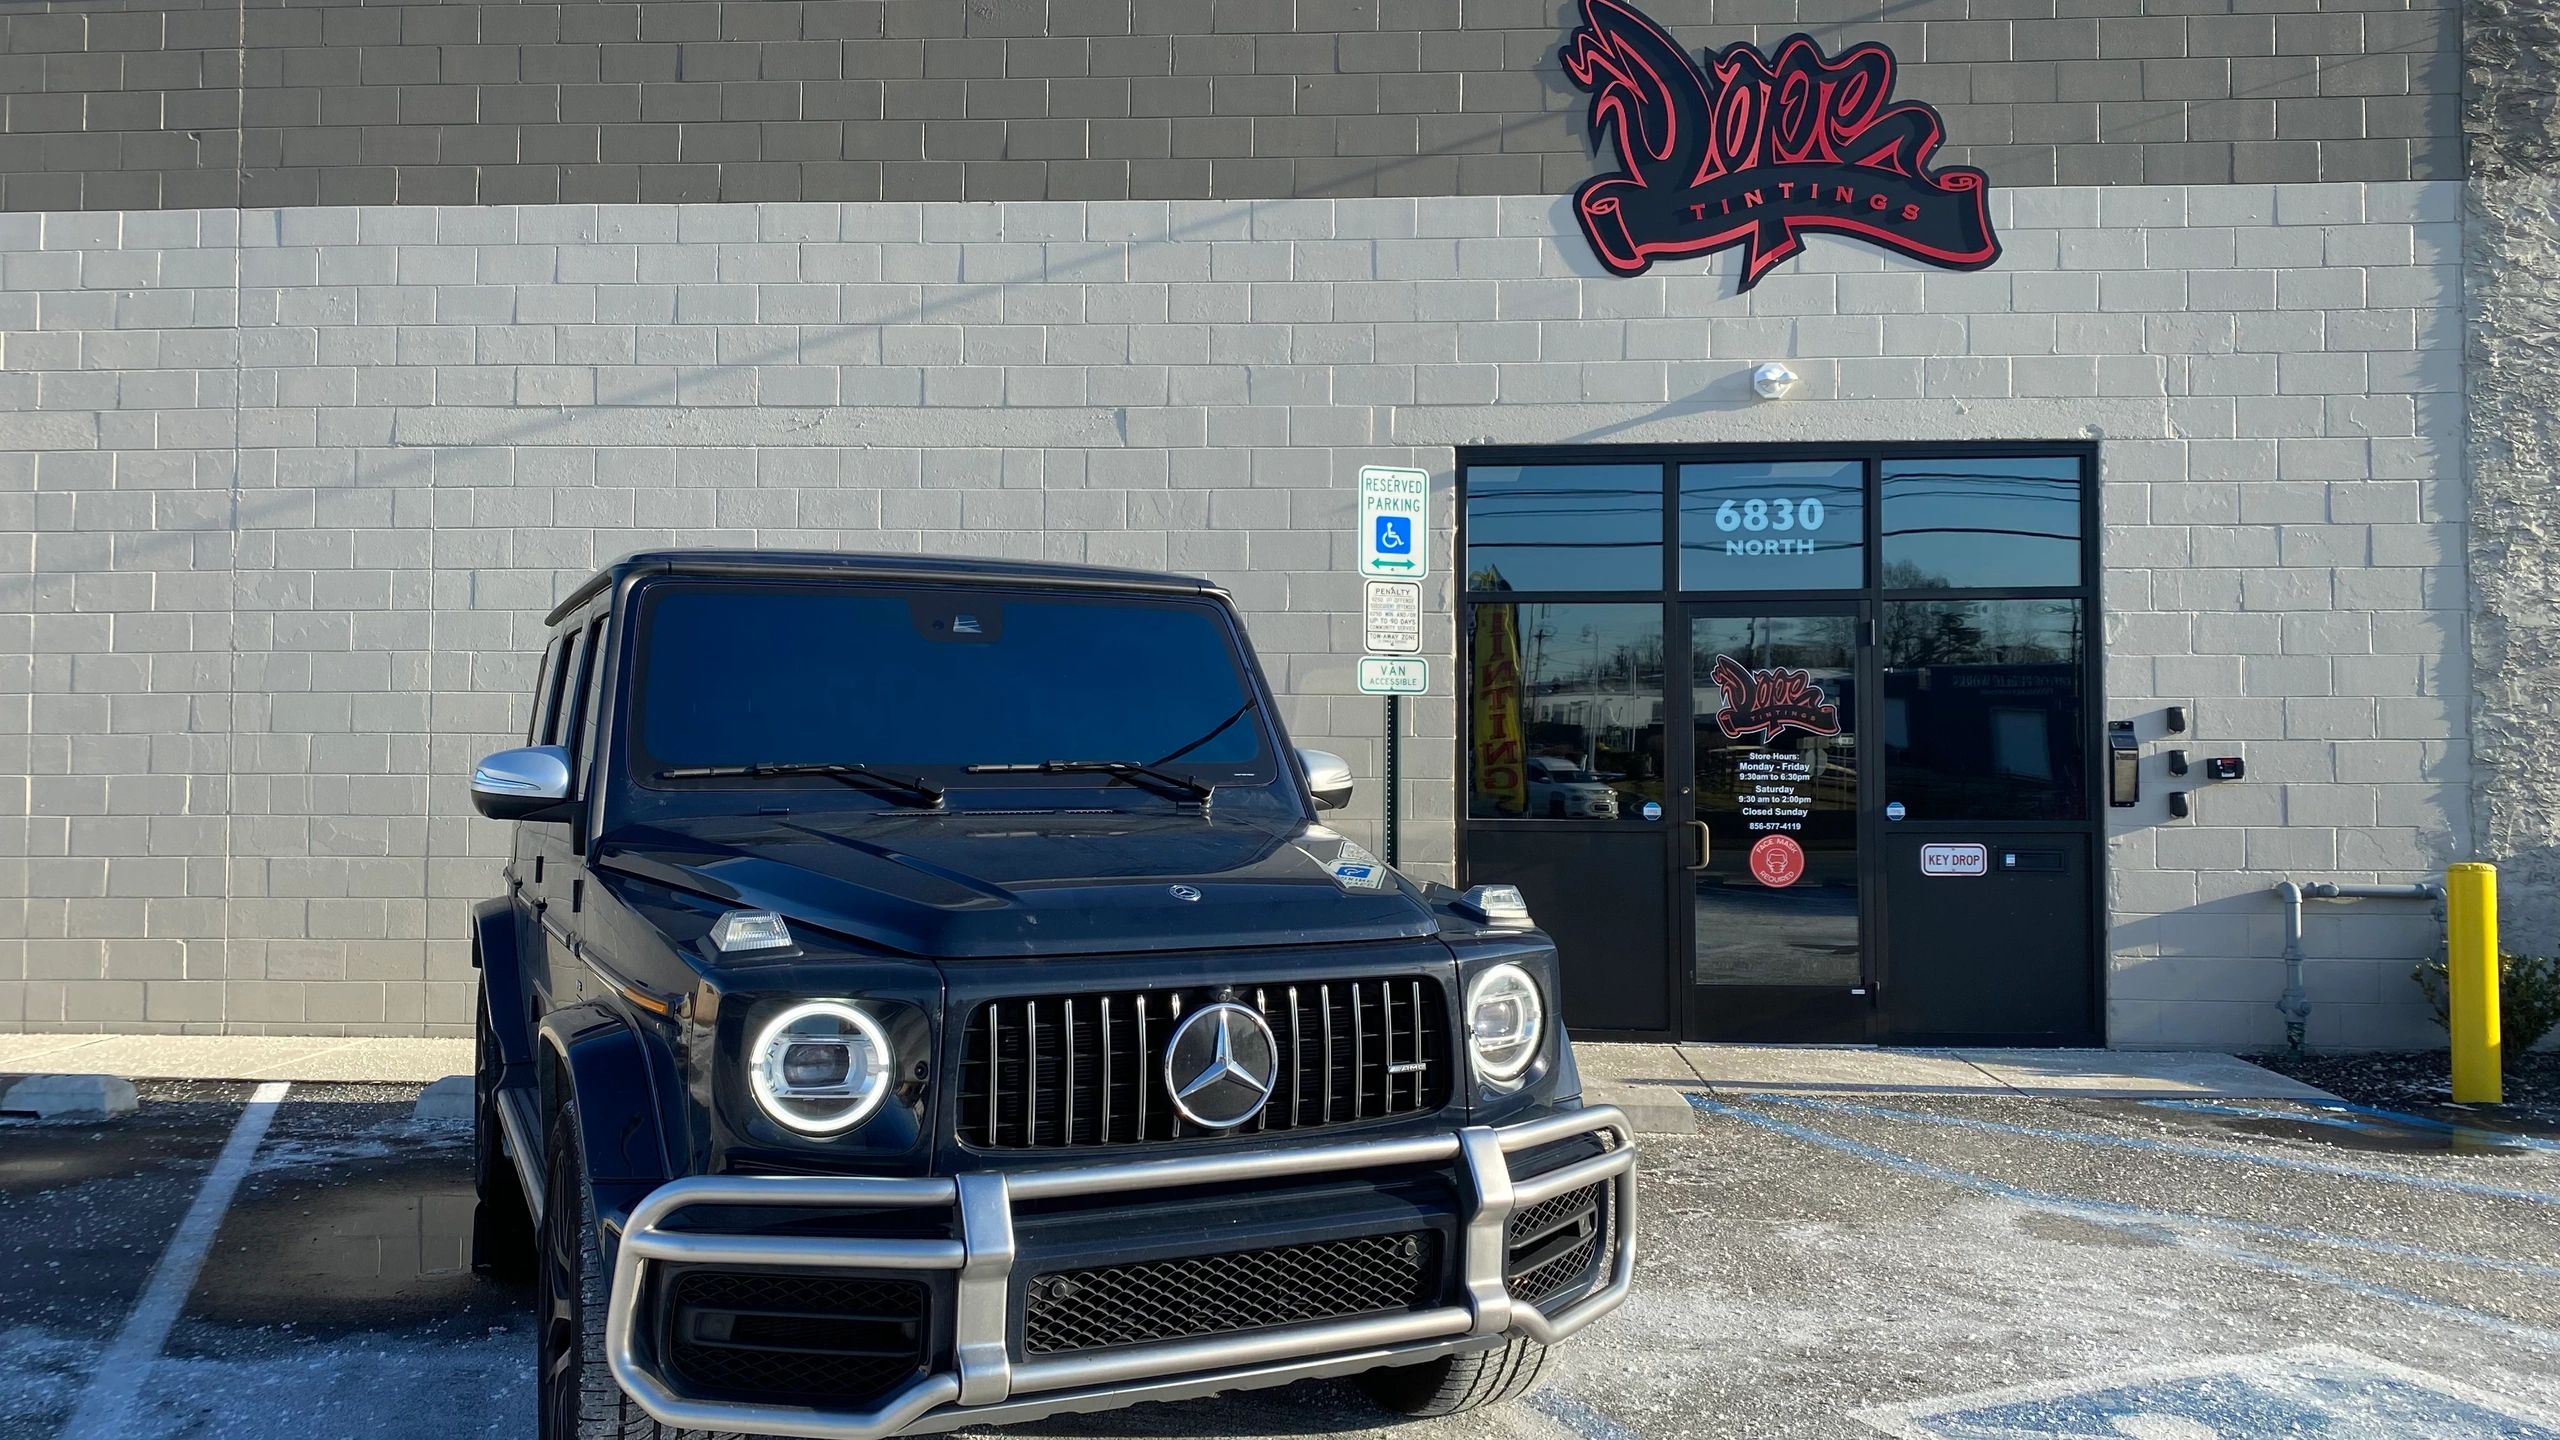 Mercedes G wagon with 20% window tint at dope tintings in pennsauken nj 